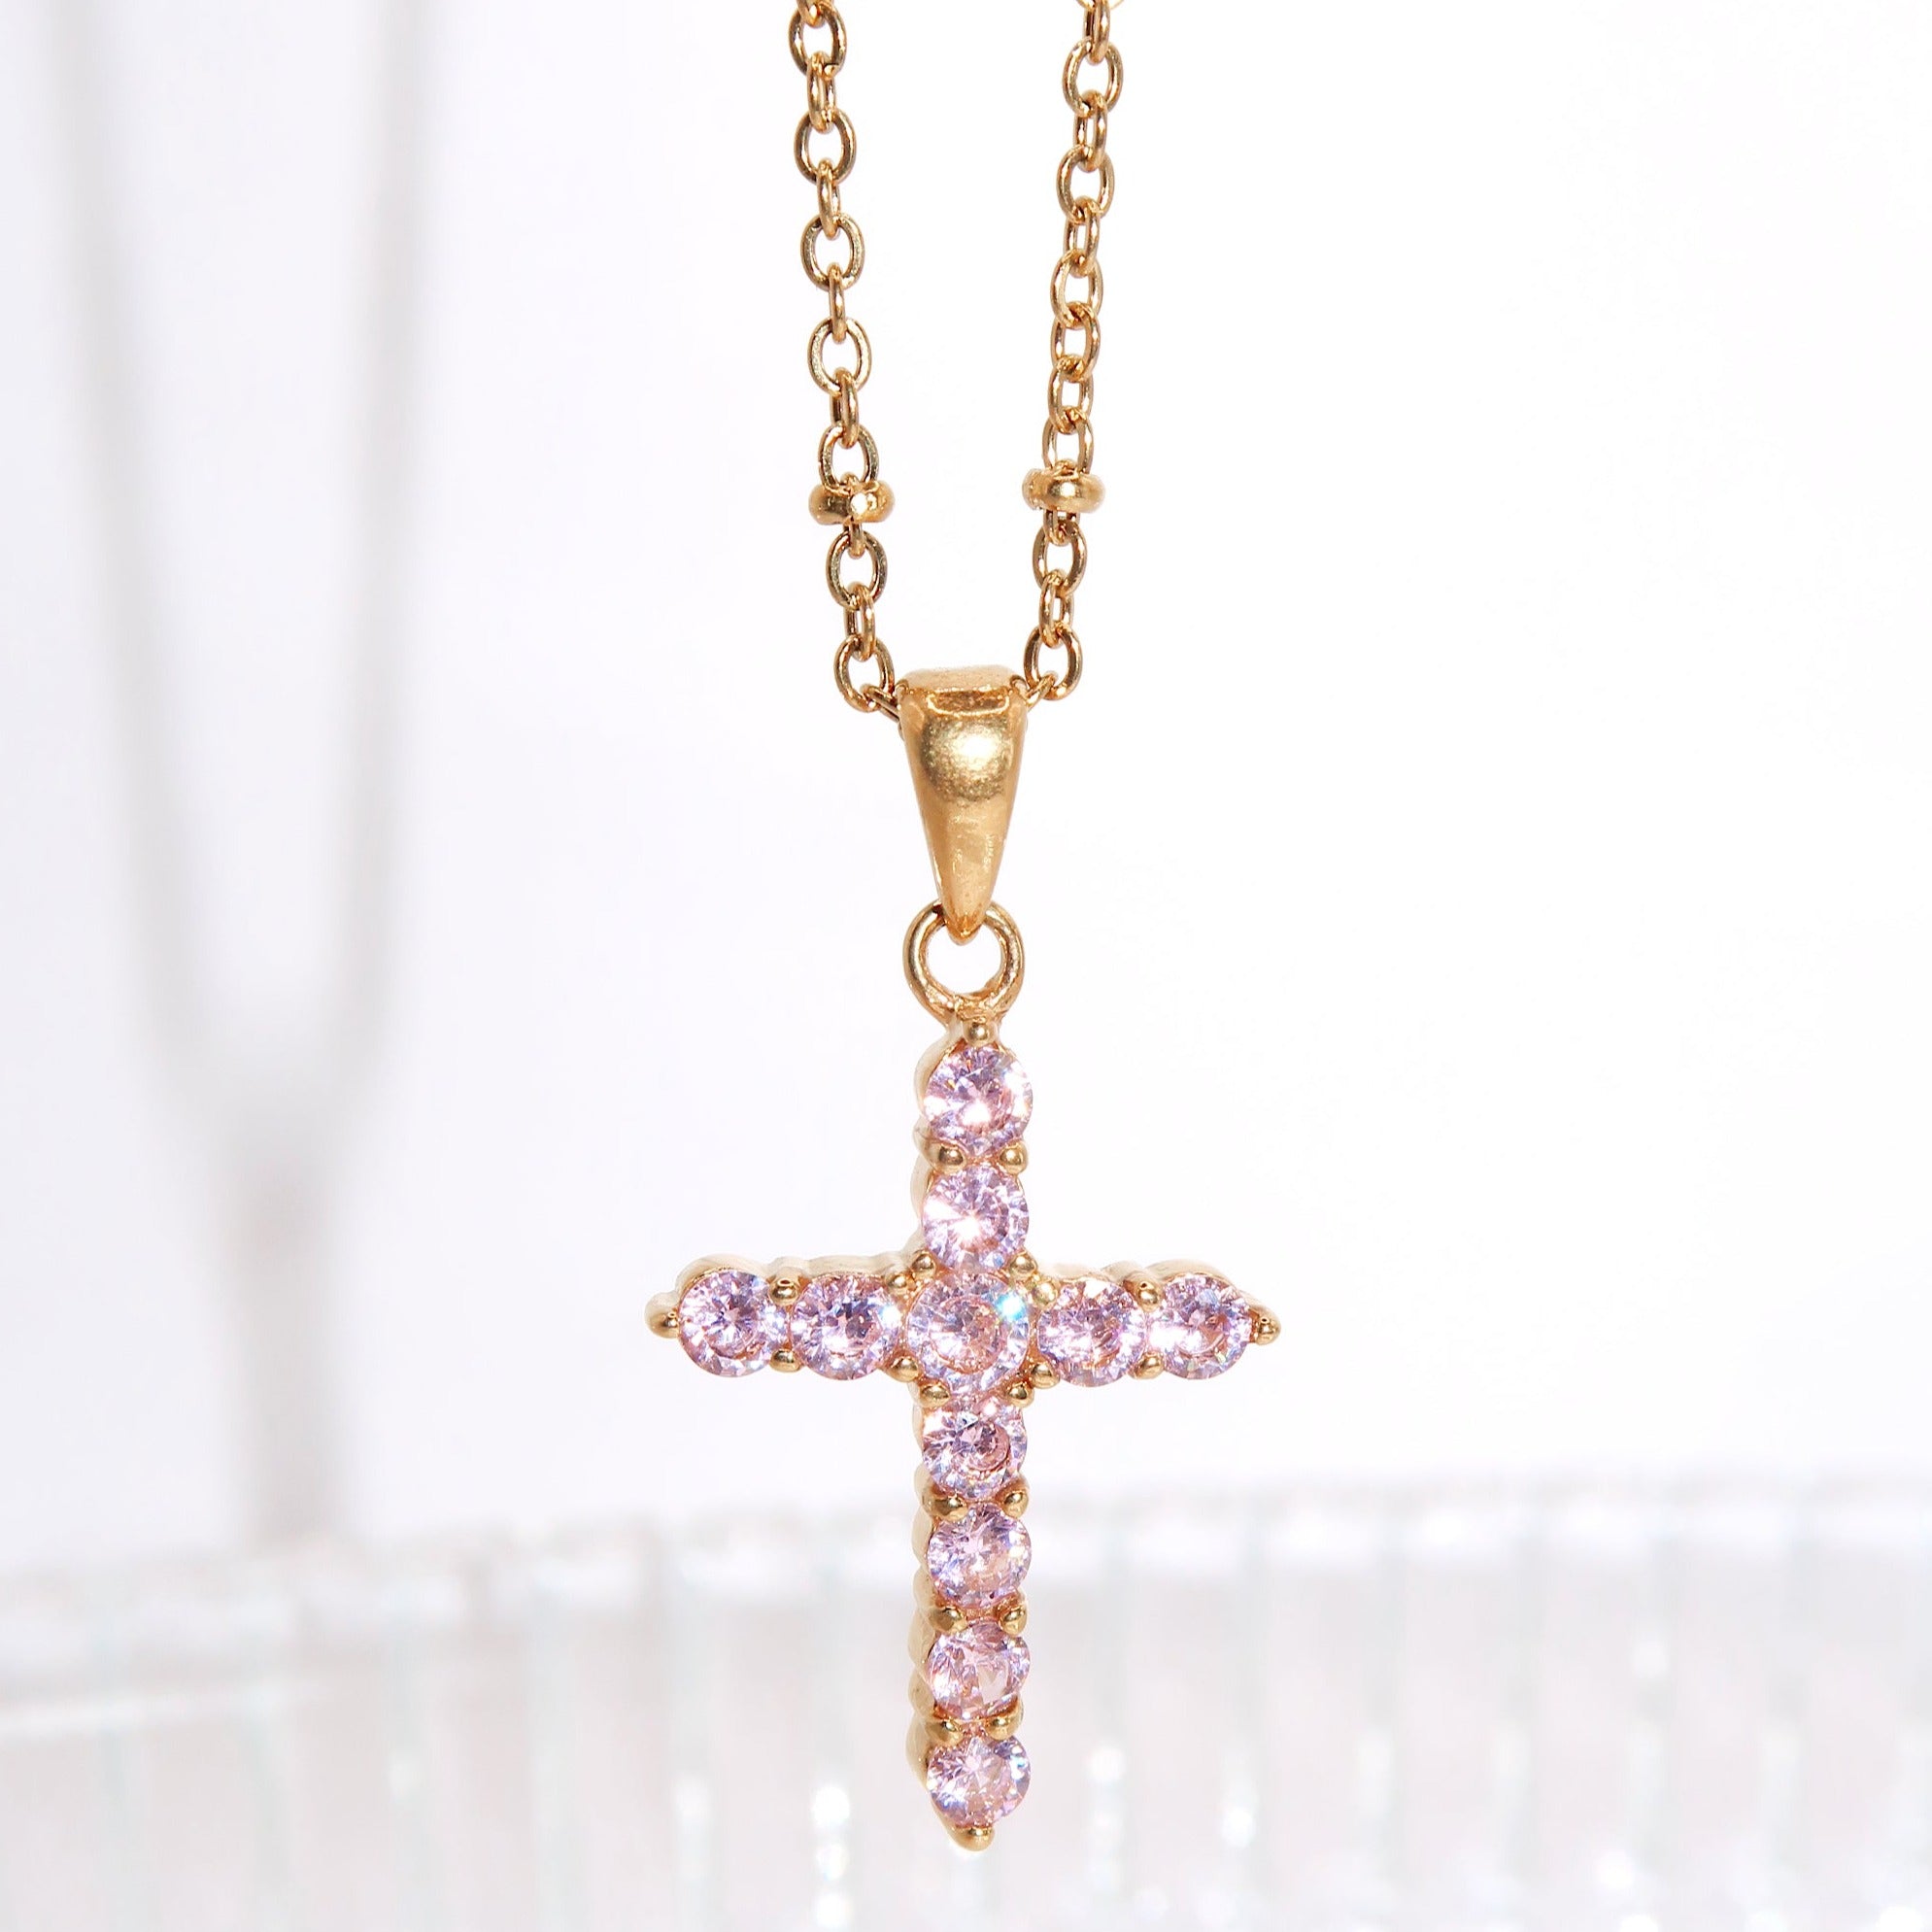 EMMY - 18K PVD Gold Plated Dainty Cross Pendant Necklace with Pink CZ Stones - Mixed Metals